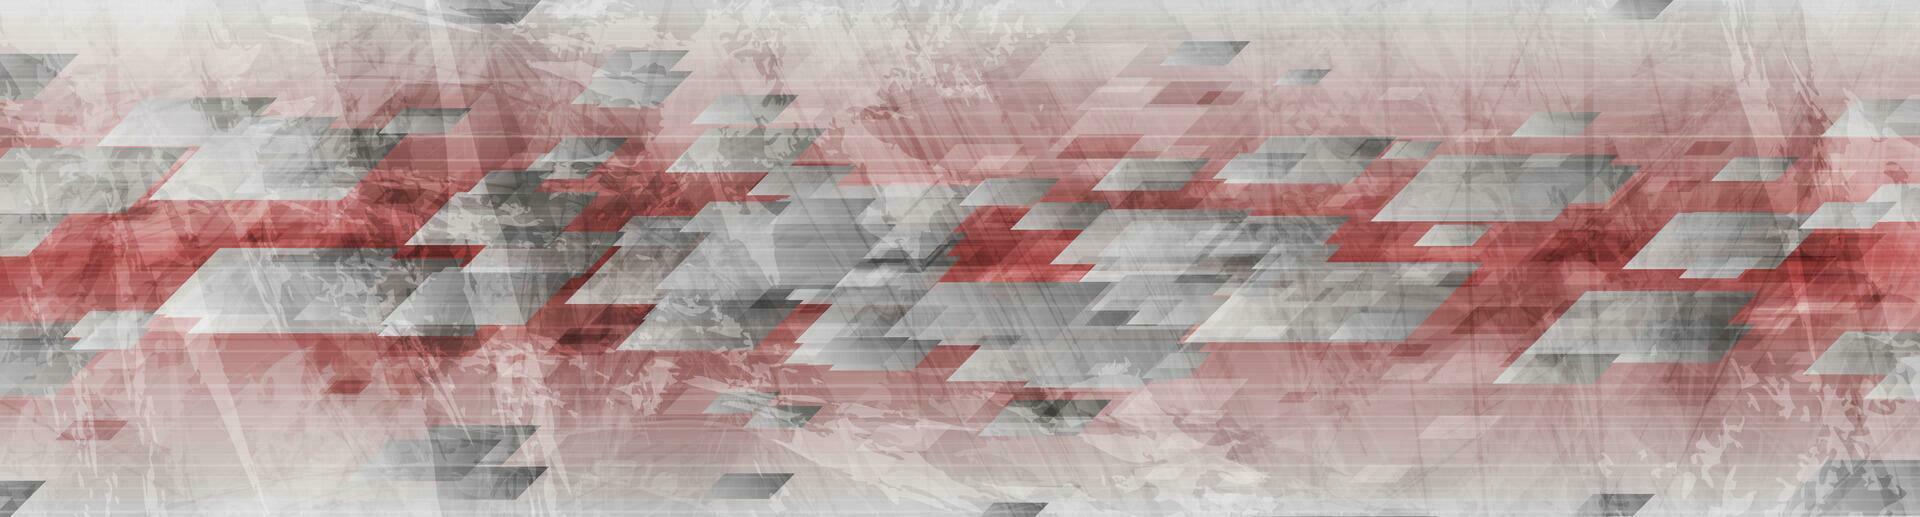 Red and grey grunge tech geometric abstract background vector